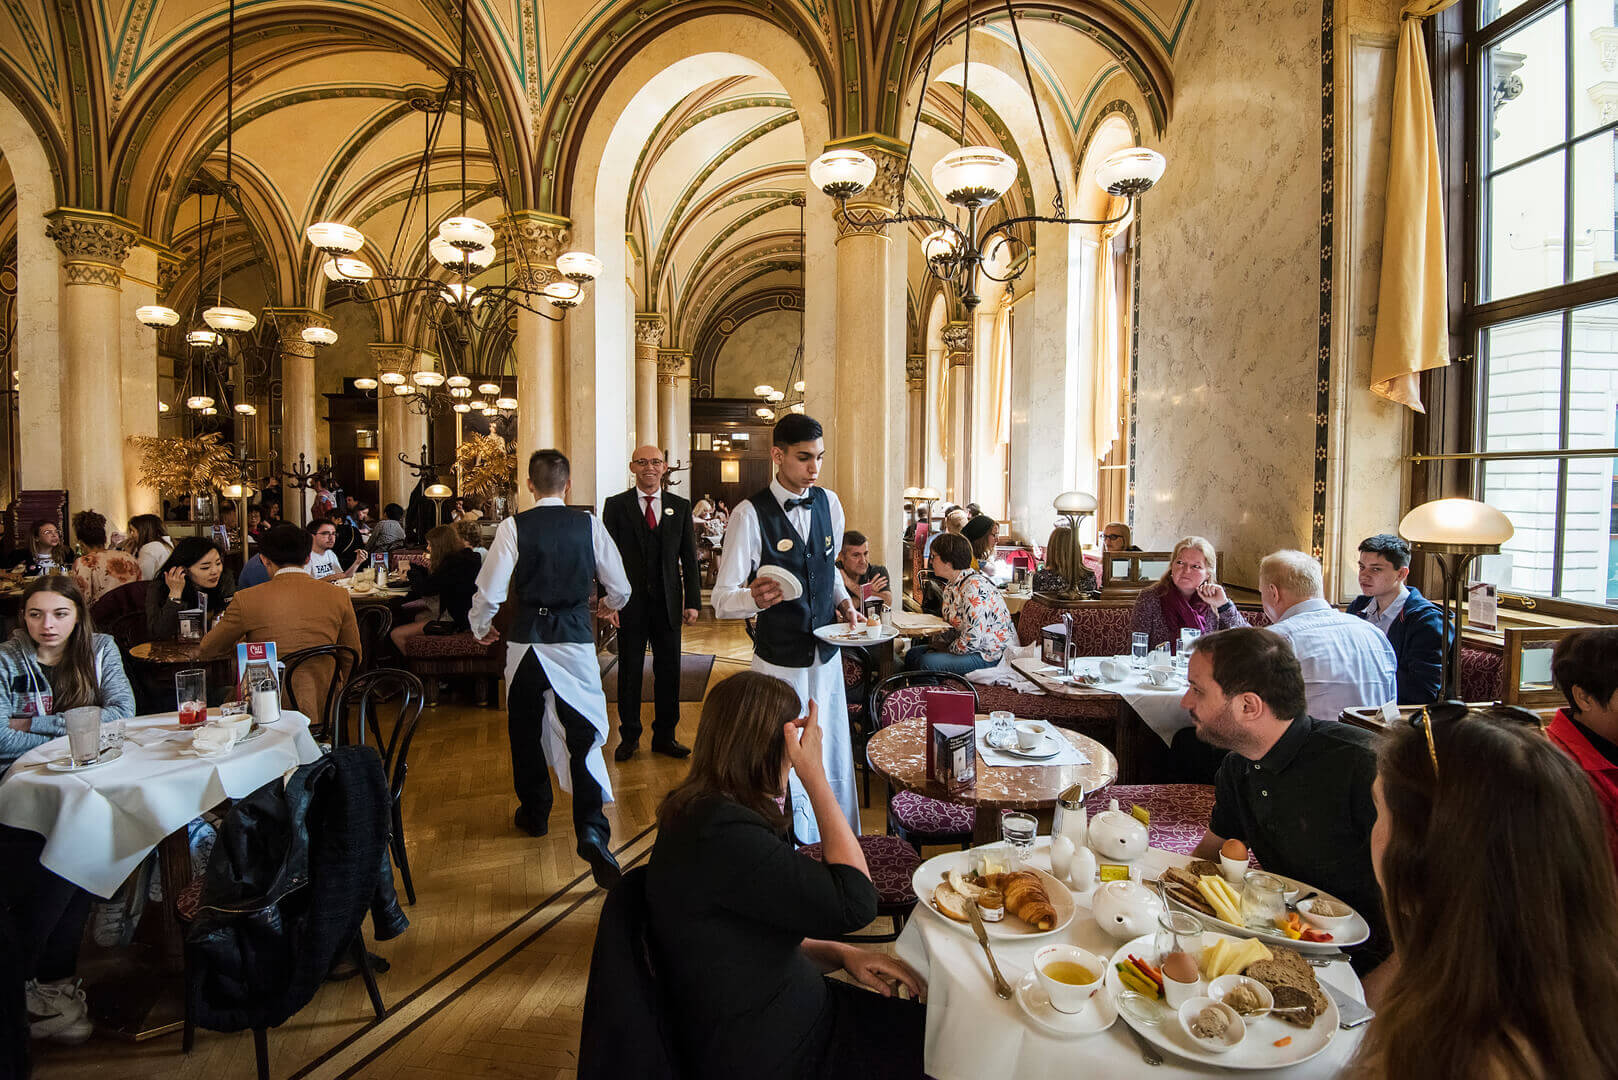 Vienna, Austria - May 31, 2019. Interior of the Café Central. Café Central is a traditional Viennese café located at Herrengasse 14 in the Innere Stadt.